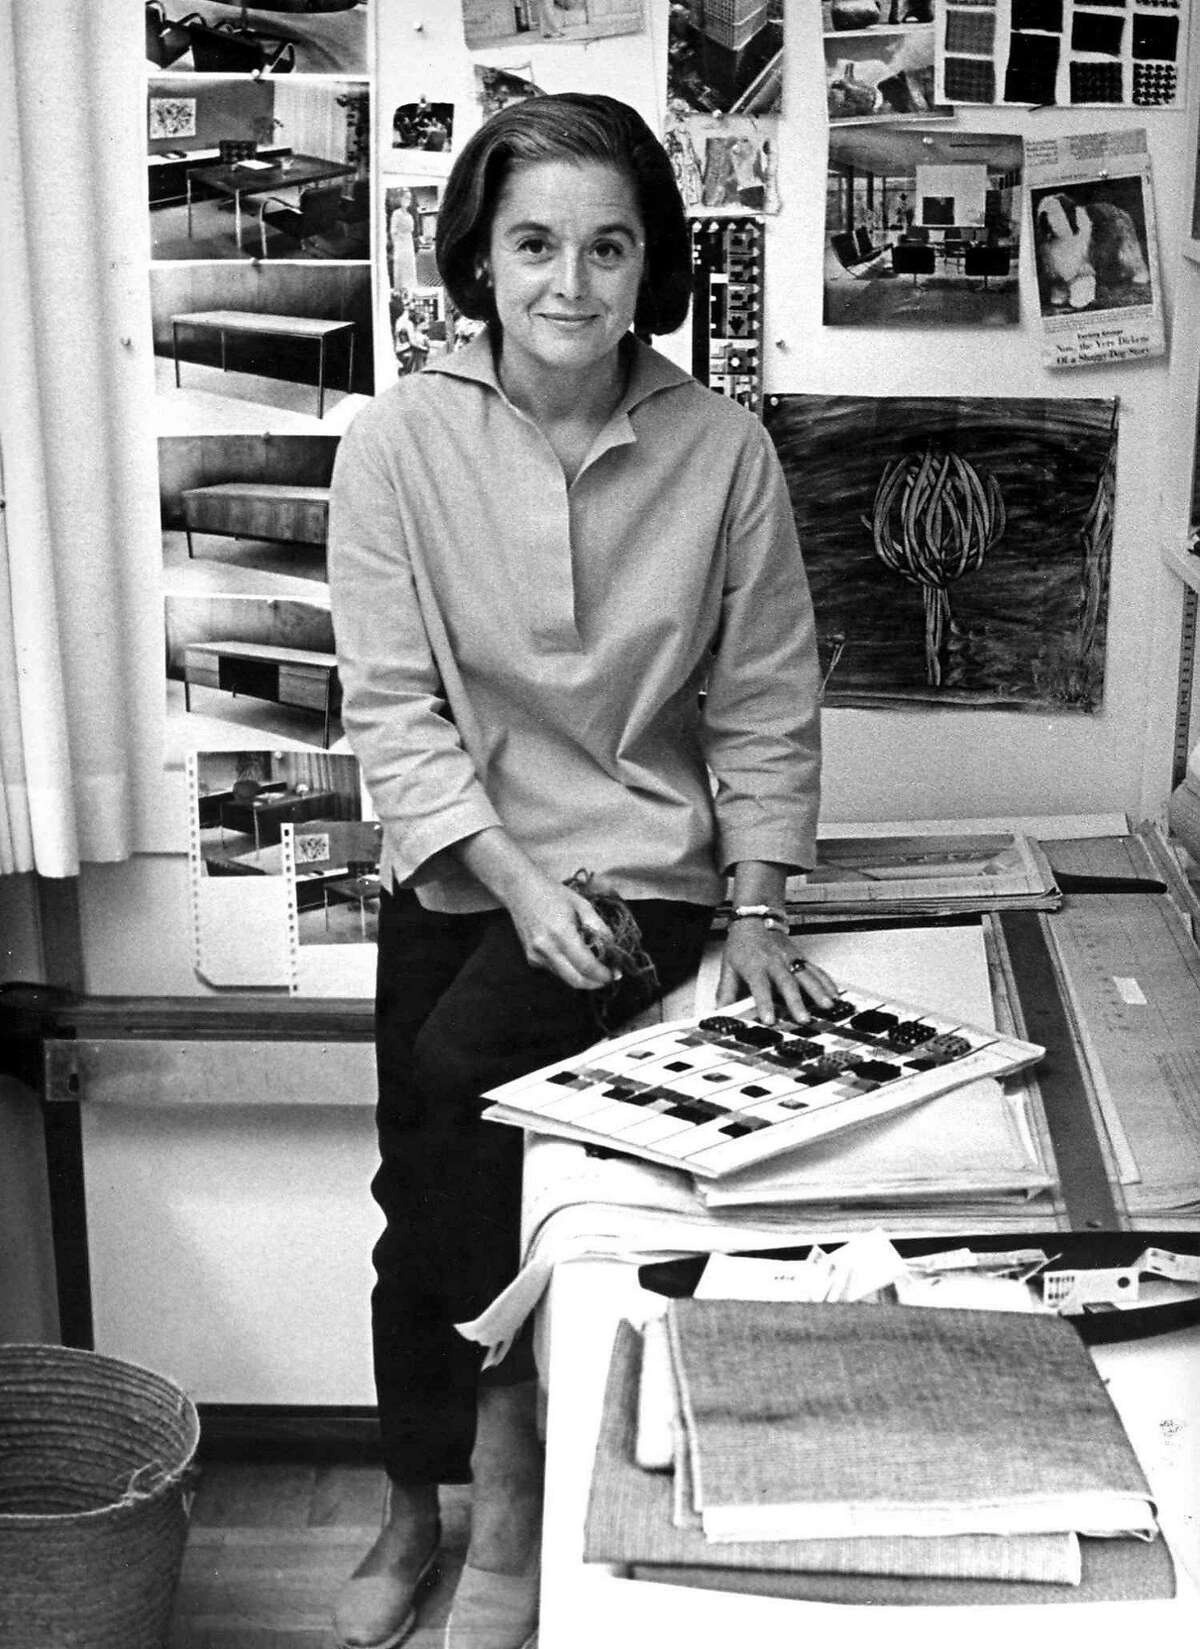 Portrait of American architect and furniture designer Florence Knoll Bassett as she sits on the edge of a table with a book of fabric swatches in front of her, 1961. (Photo by Ray Fisher/The LIFE Images Collection/Getty Images)